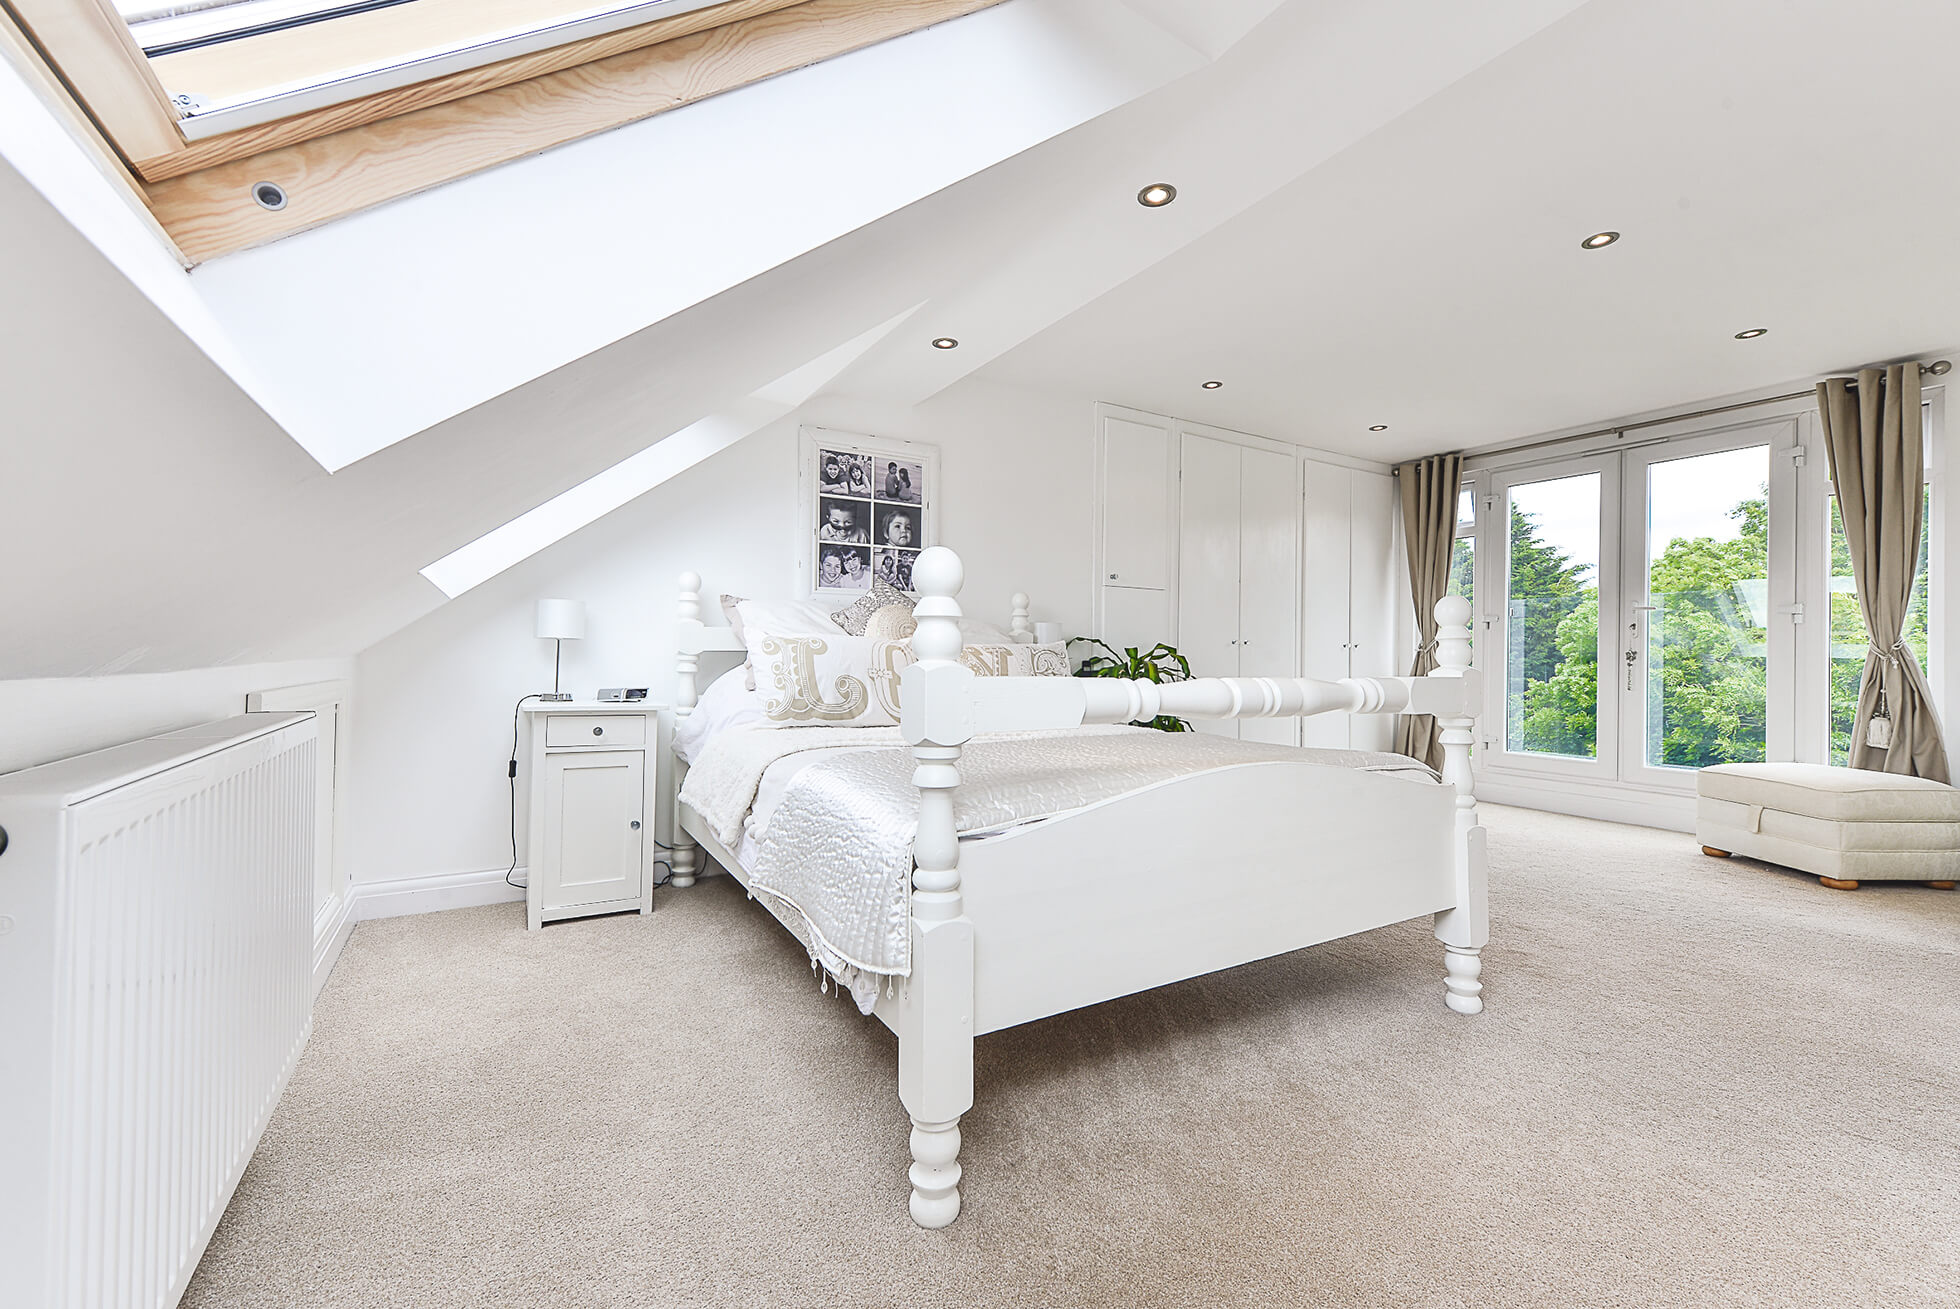 Do you have a question about converting your Loft in Garston? Here are the most popular questions asked by our clients.